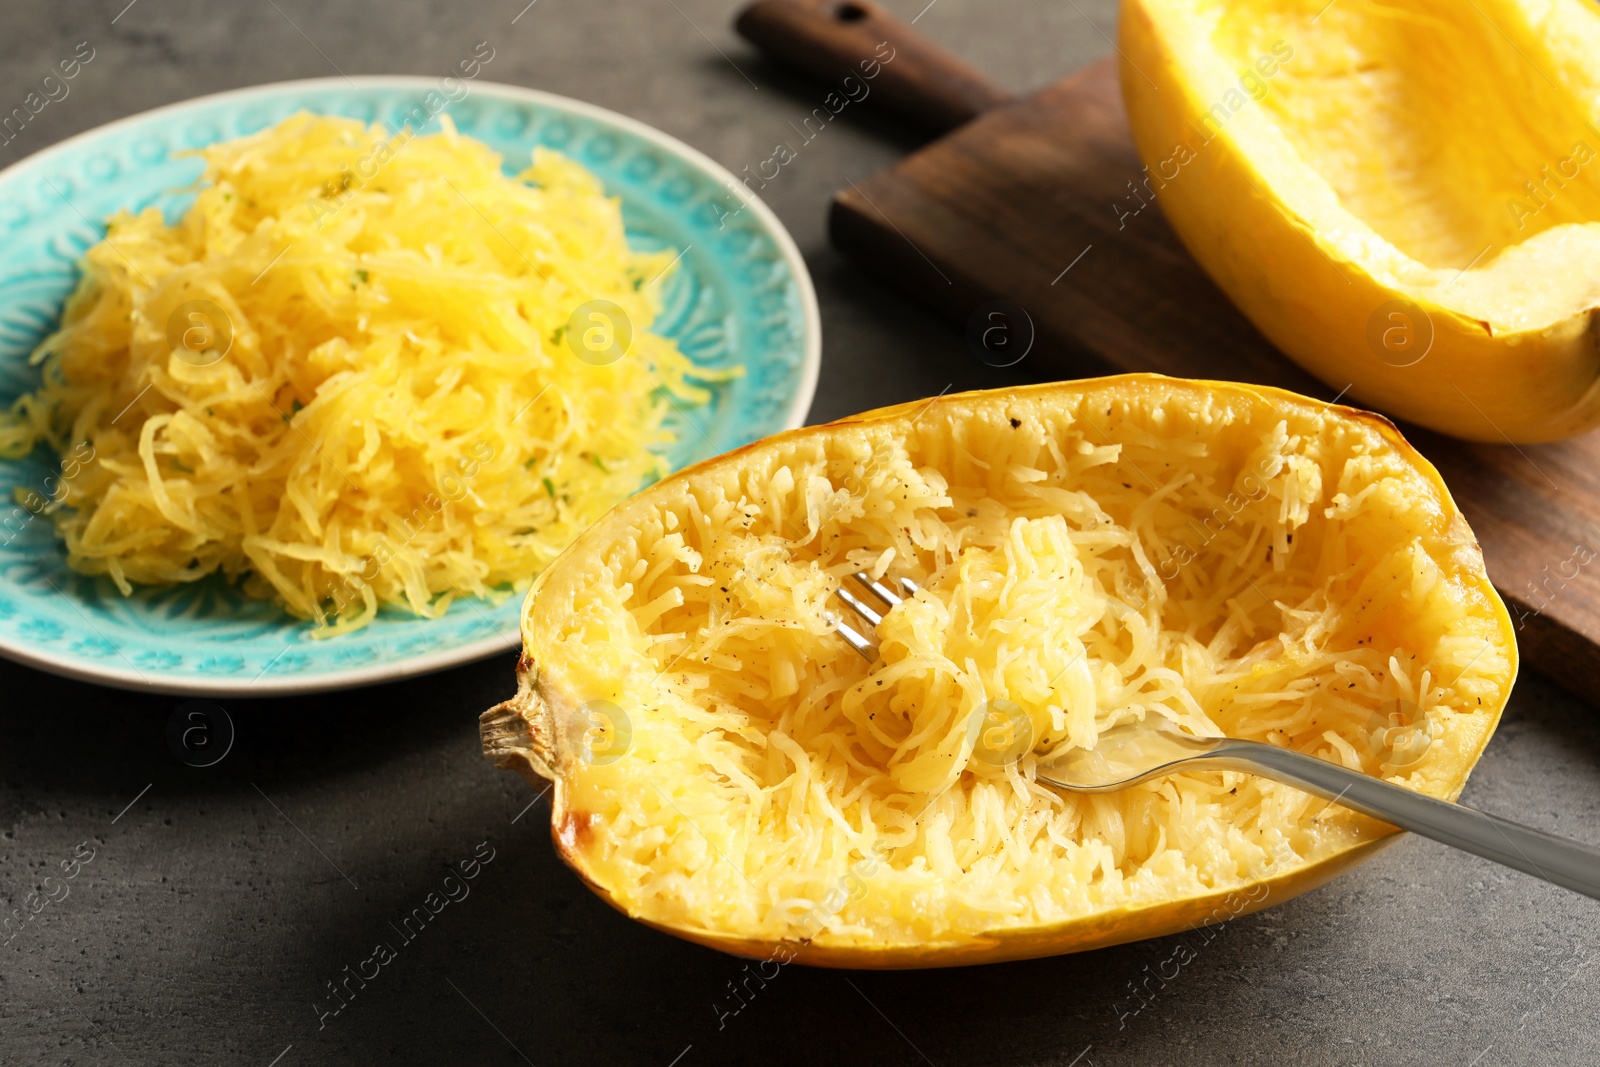 Photo of Cooked spaghetti squash and fork on table